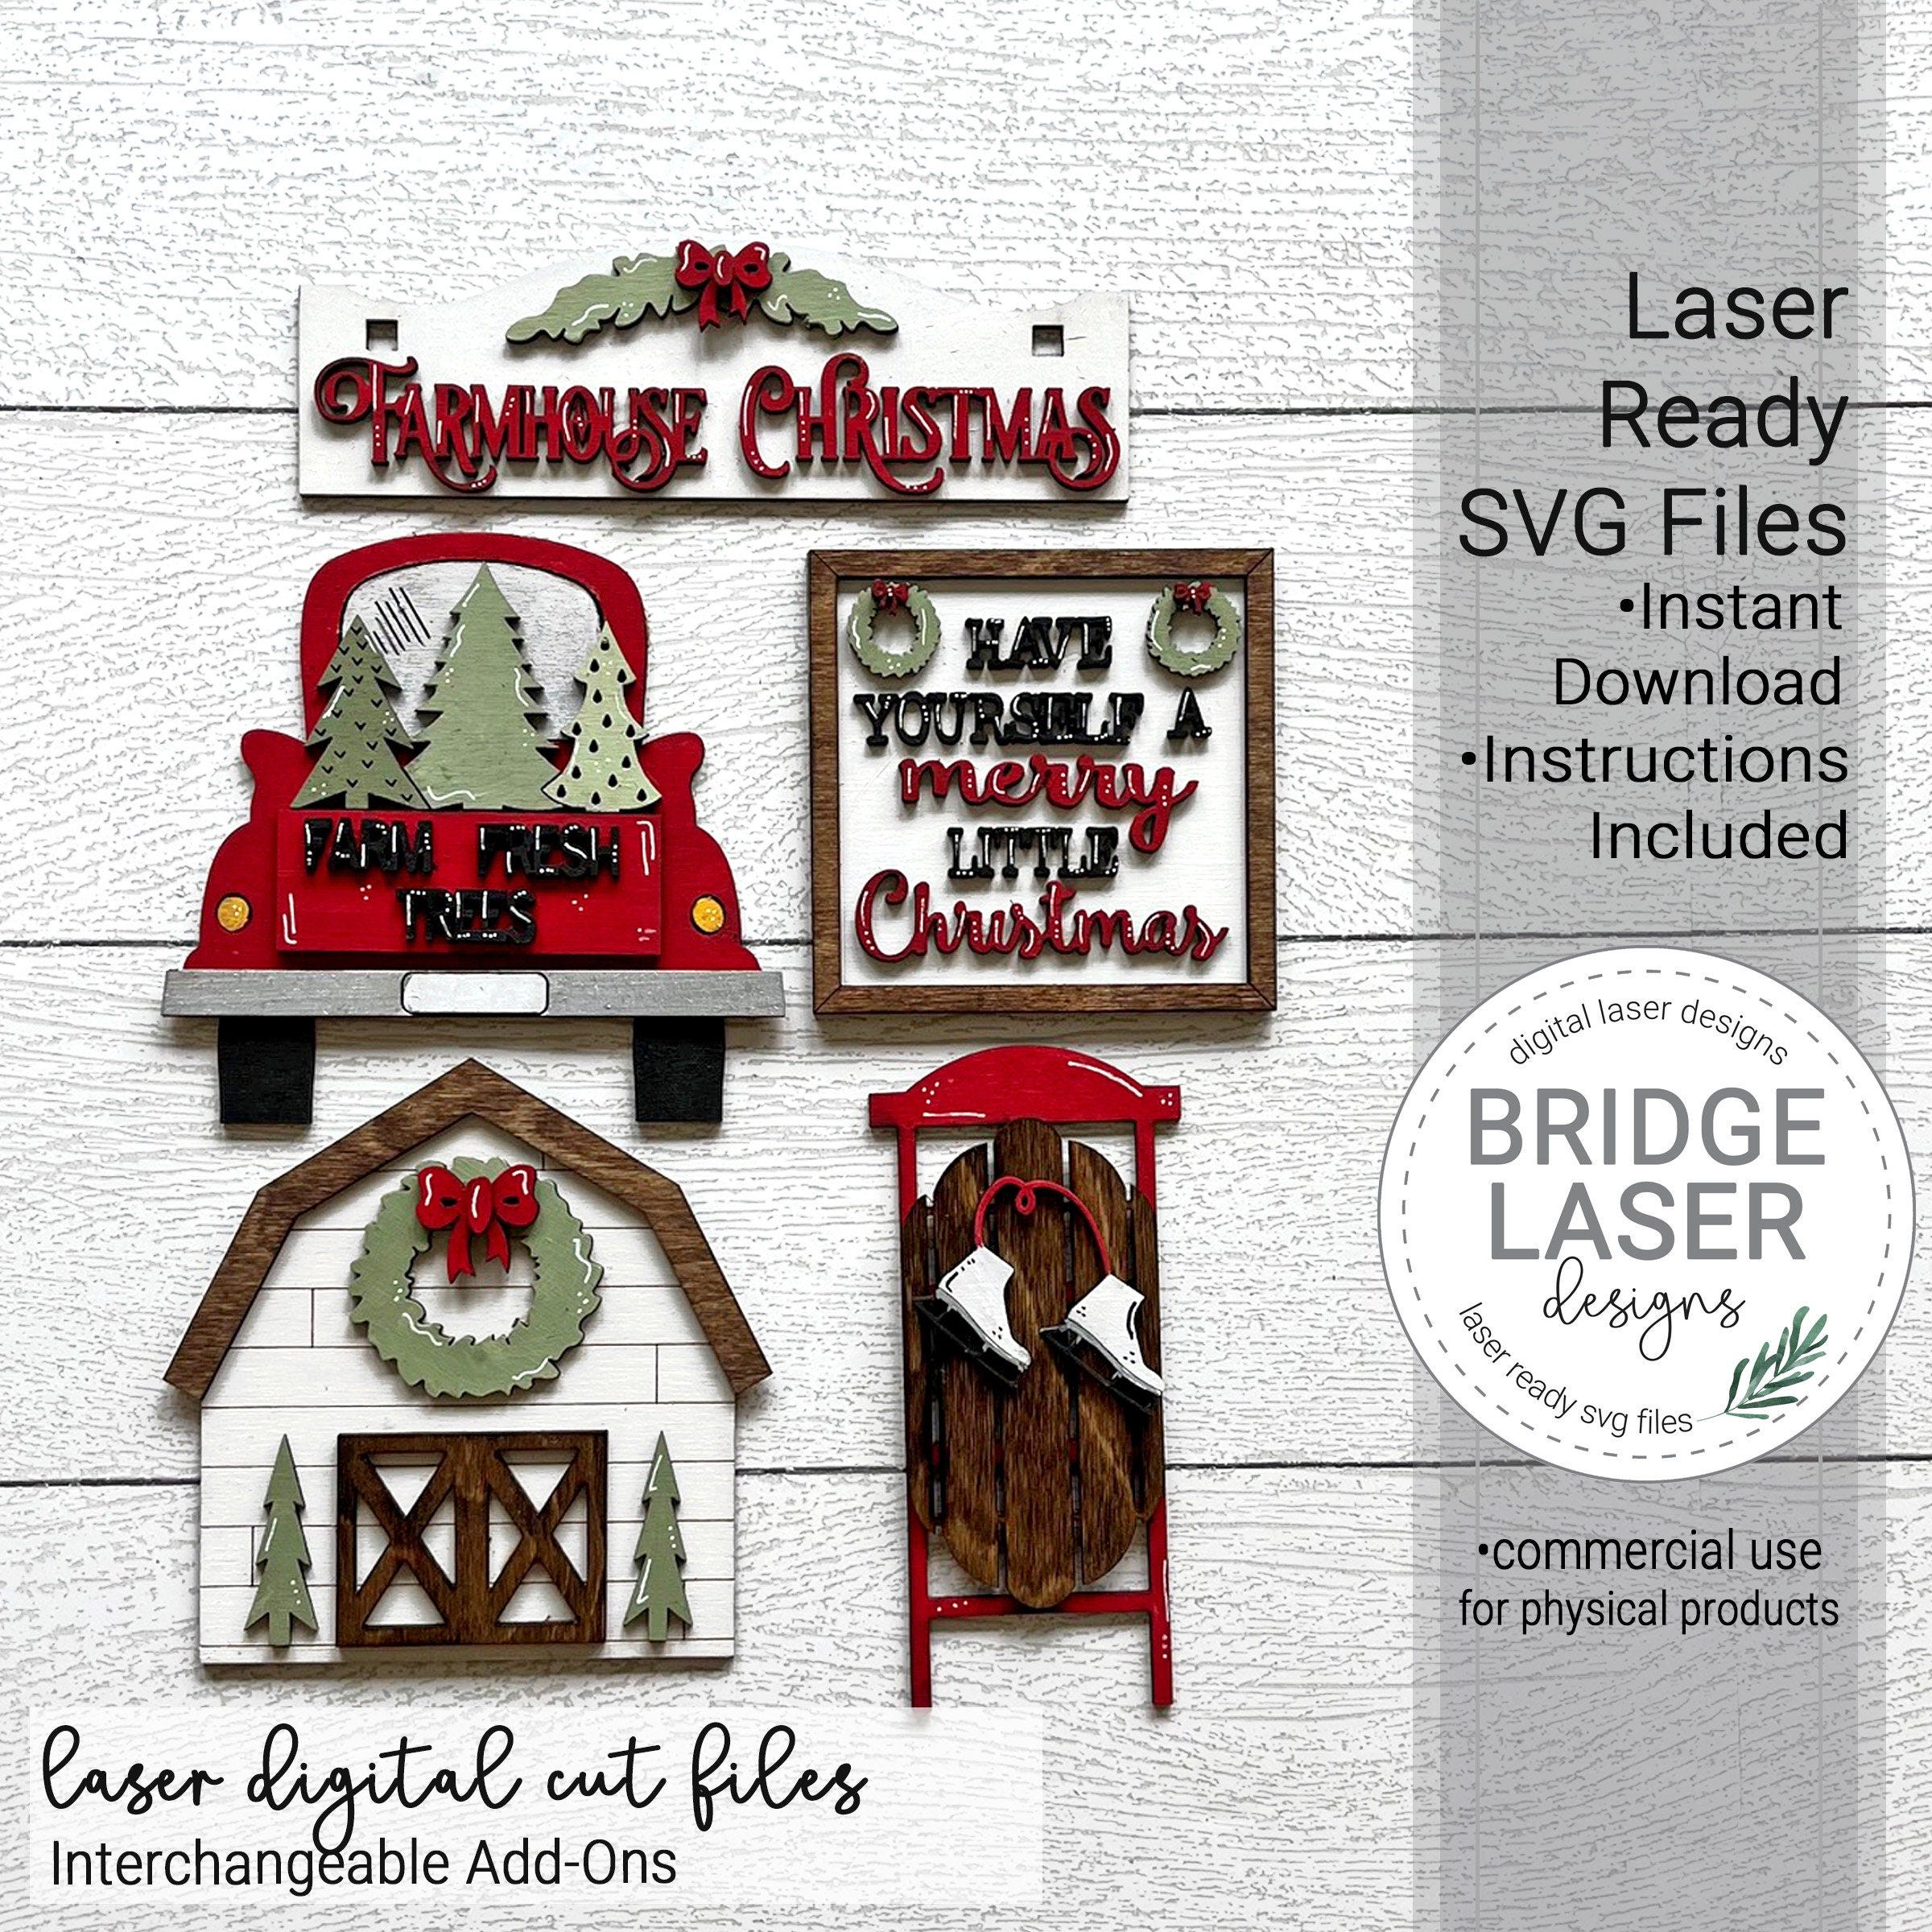 Farmhouse Christmas Laser Cut File Add On, Christmas Interchangeable Crate/Fence Tier Tray, Christmas Farm Truck Sleigh Barn Laser File SVG